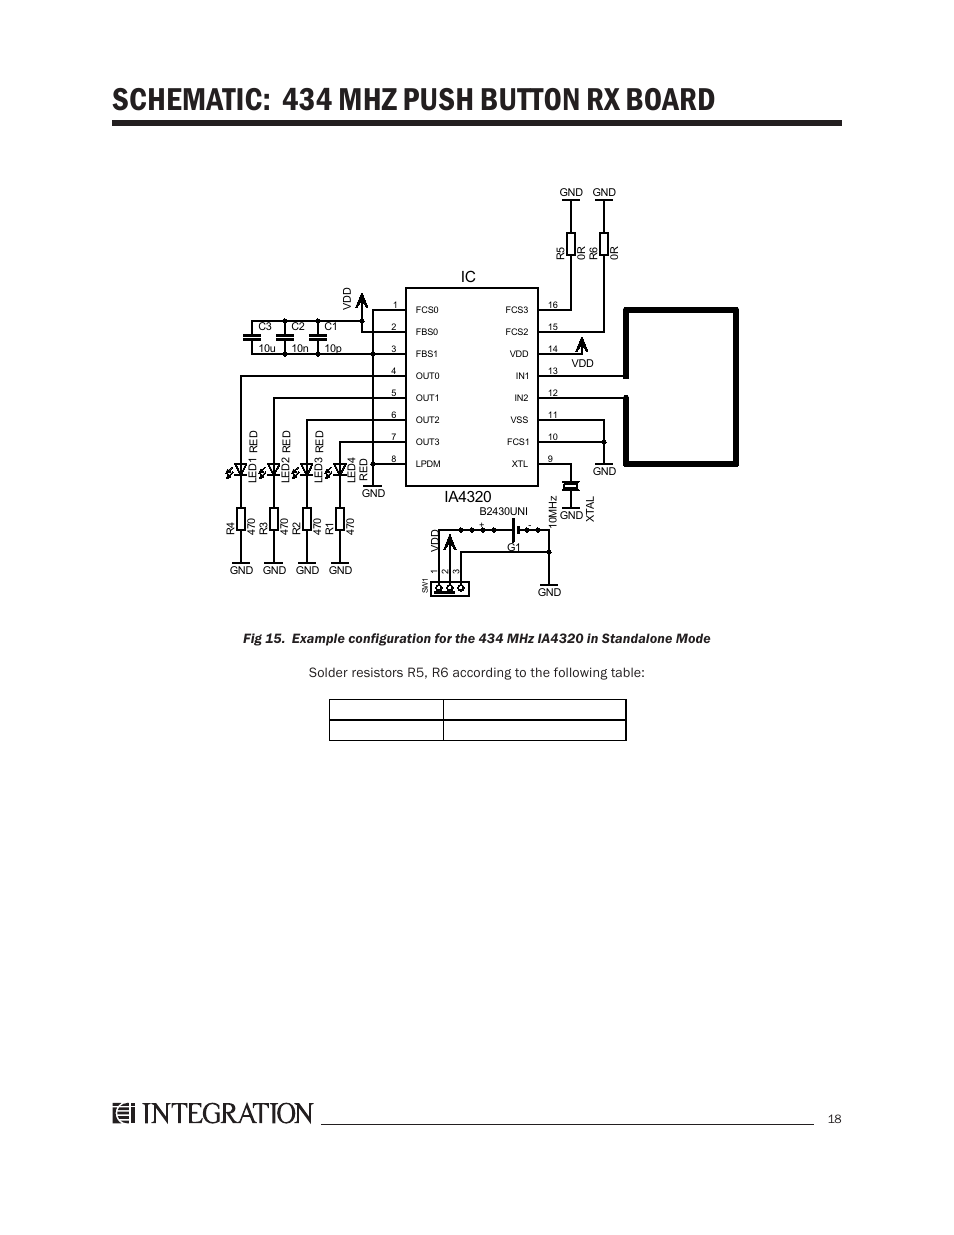 Schematic: 434 mhz push button rx board, Ia4320 | Integration 2.0r User Manual | Page 22 / 26